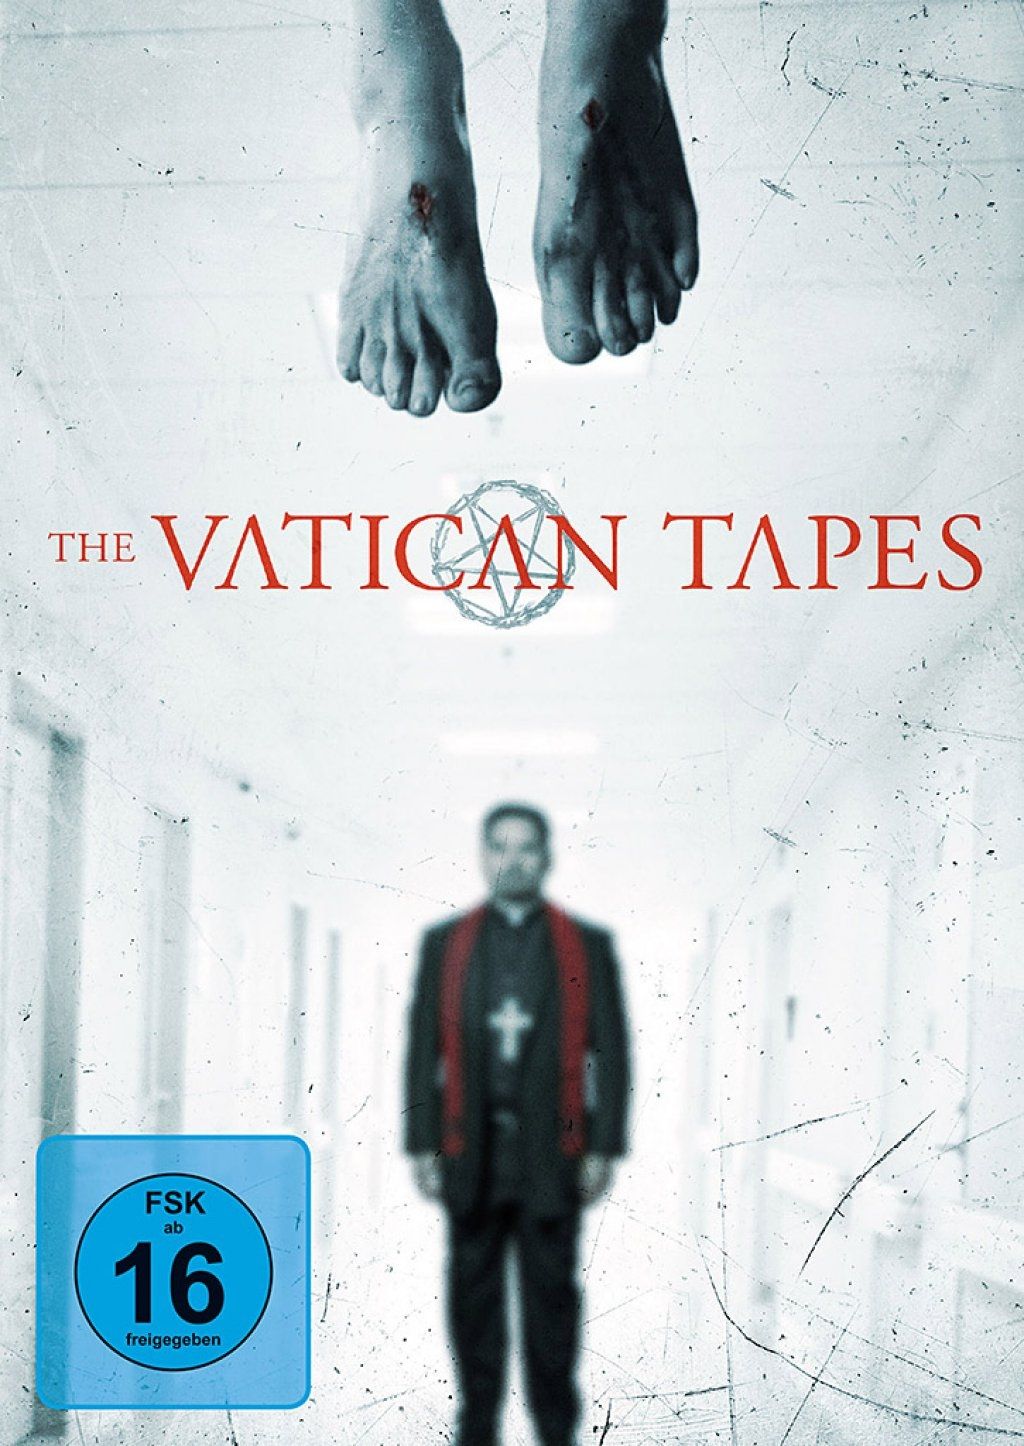 Vatican Tapes, The